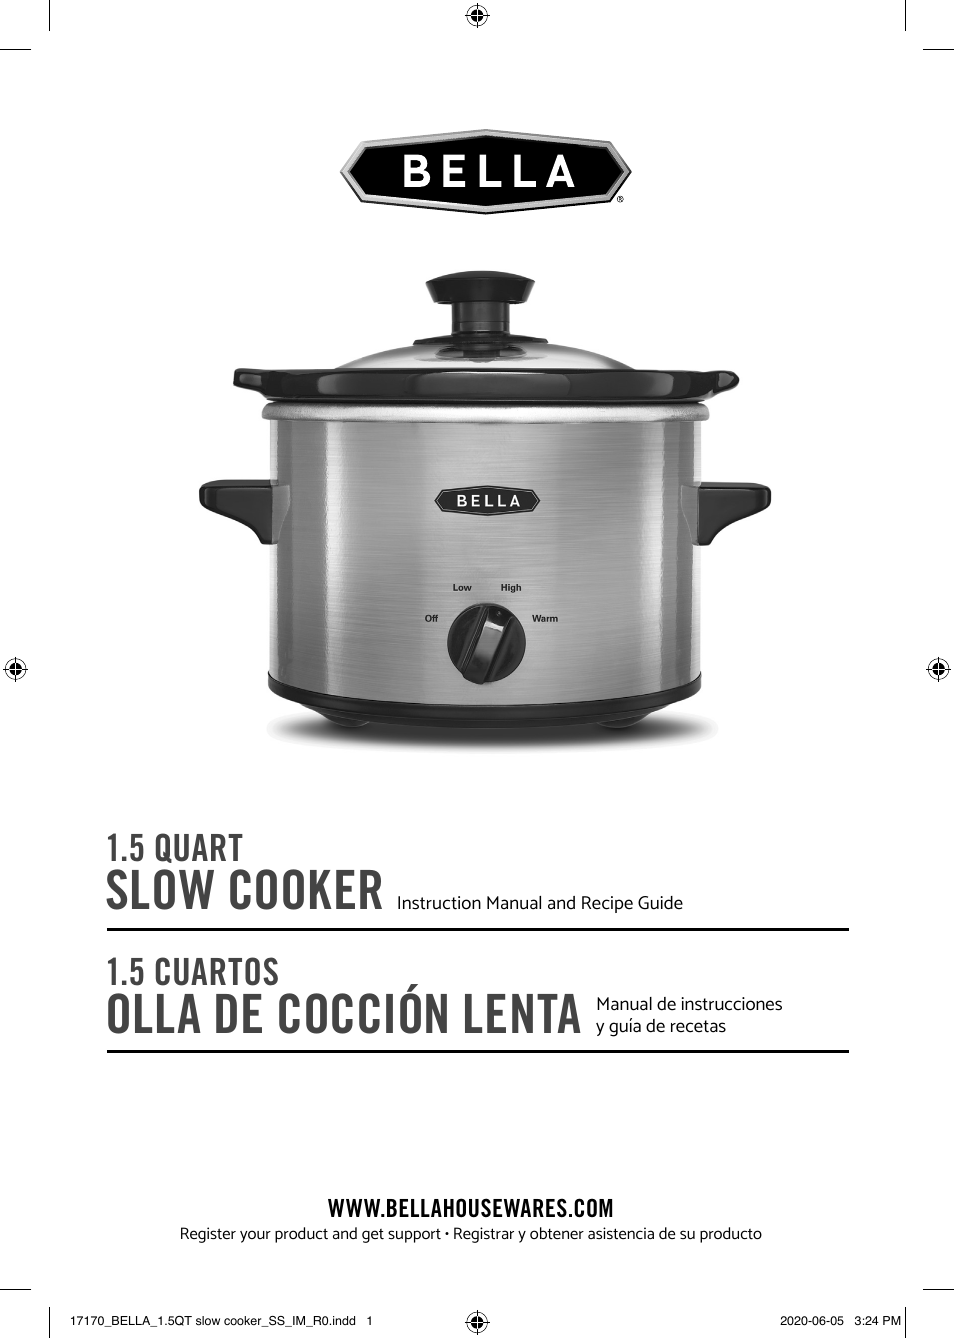 bella-1-5qt-slow-cooker-stainless-steel-owner-manual-manualzz